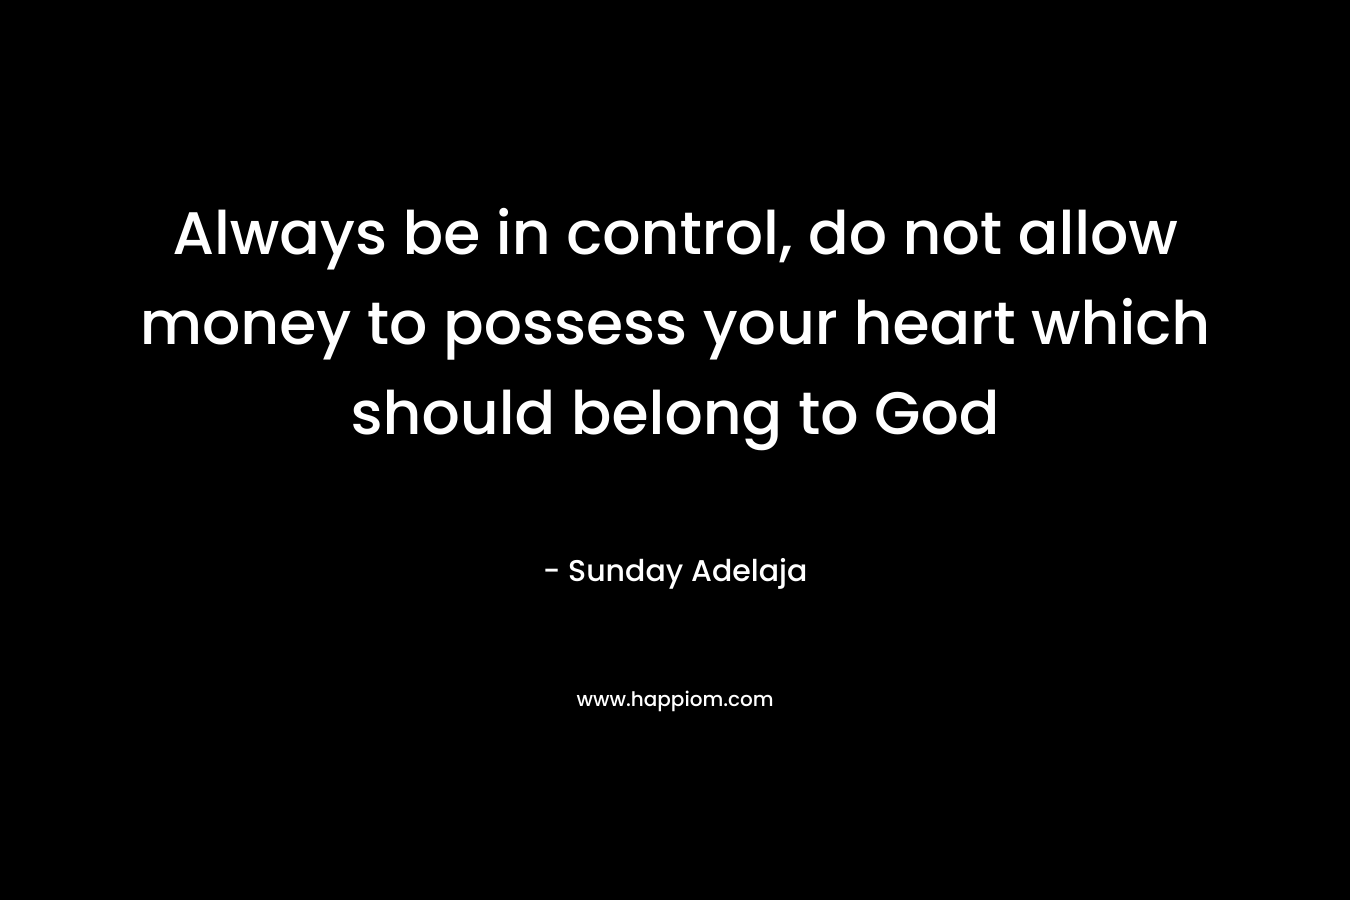 Always be in control, do not allow money to possess your heart which should belong to God